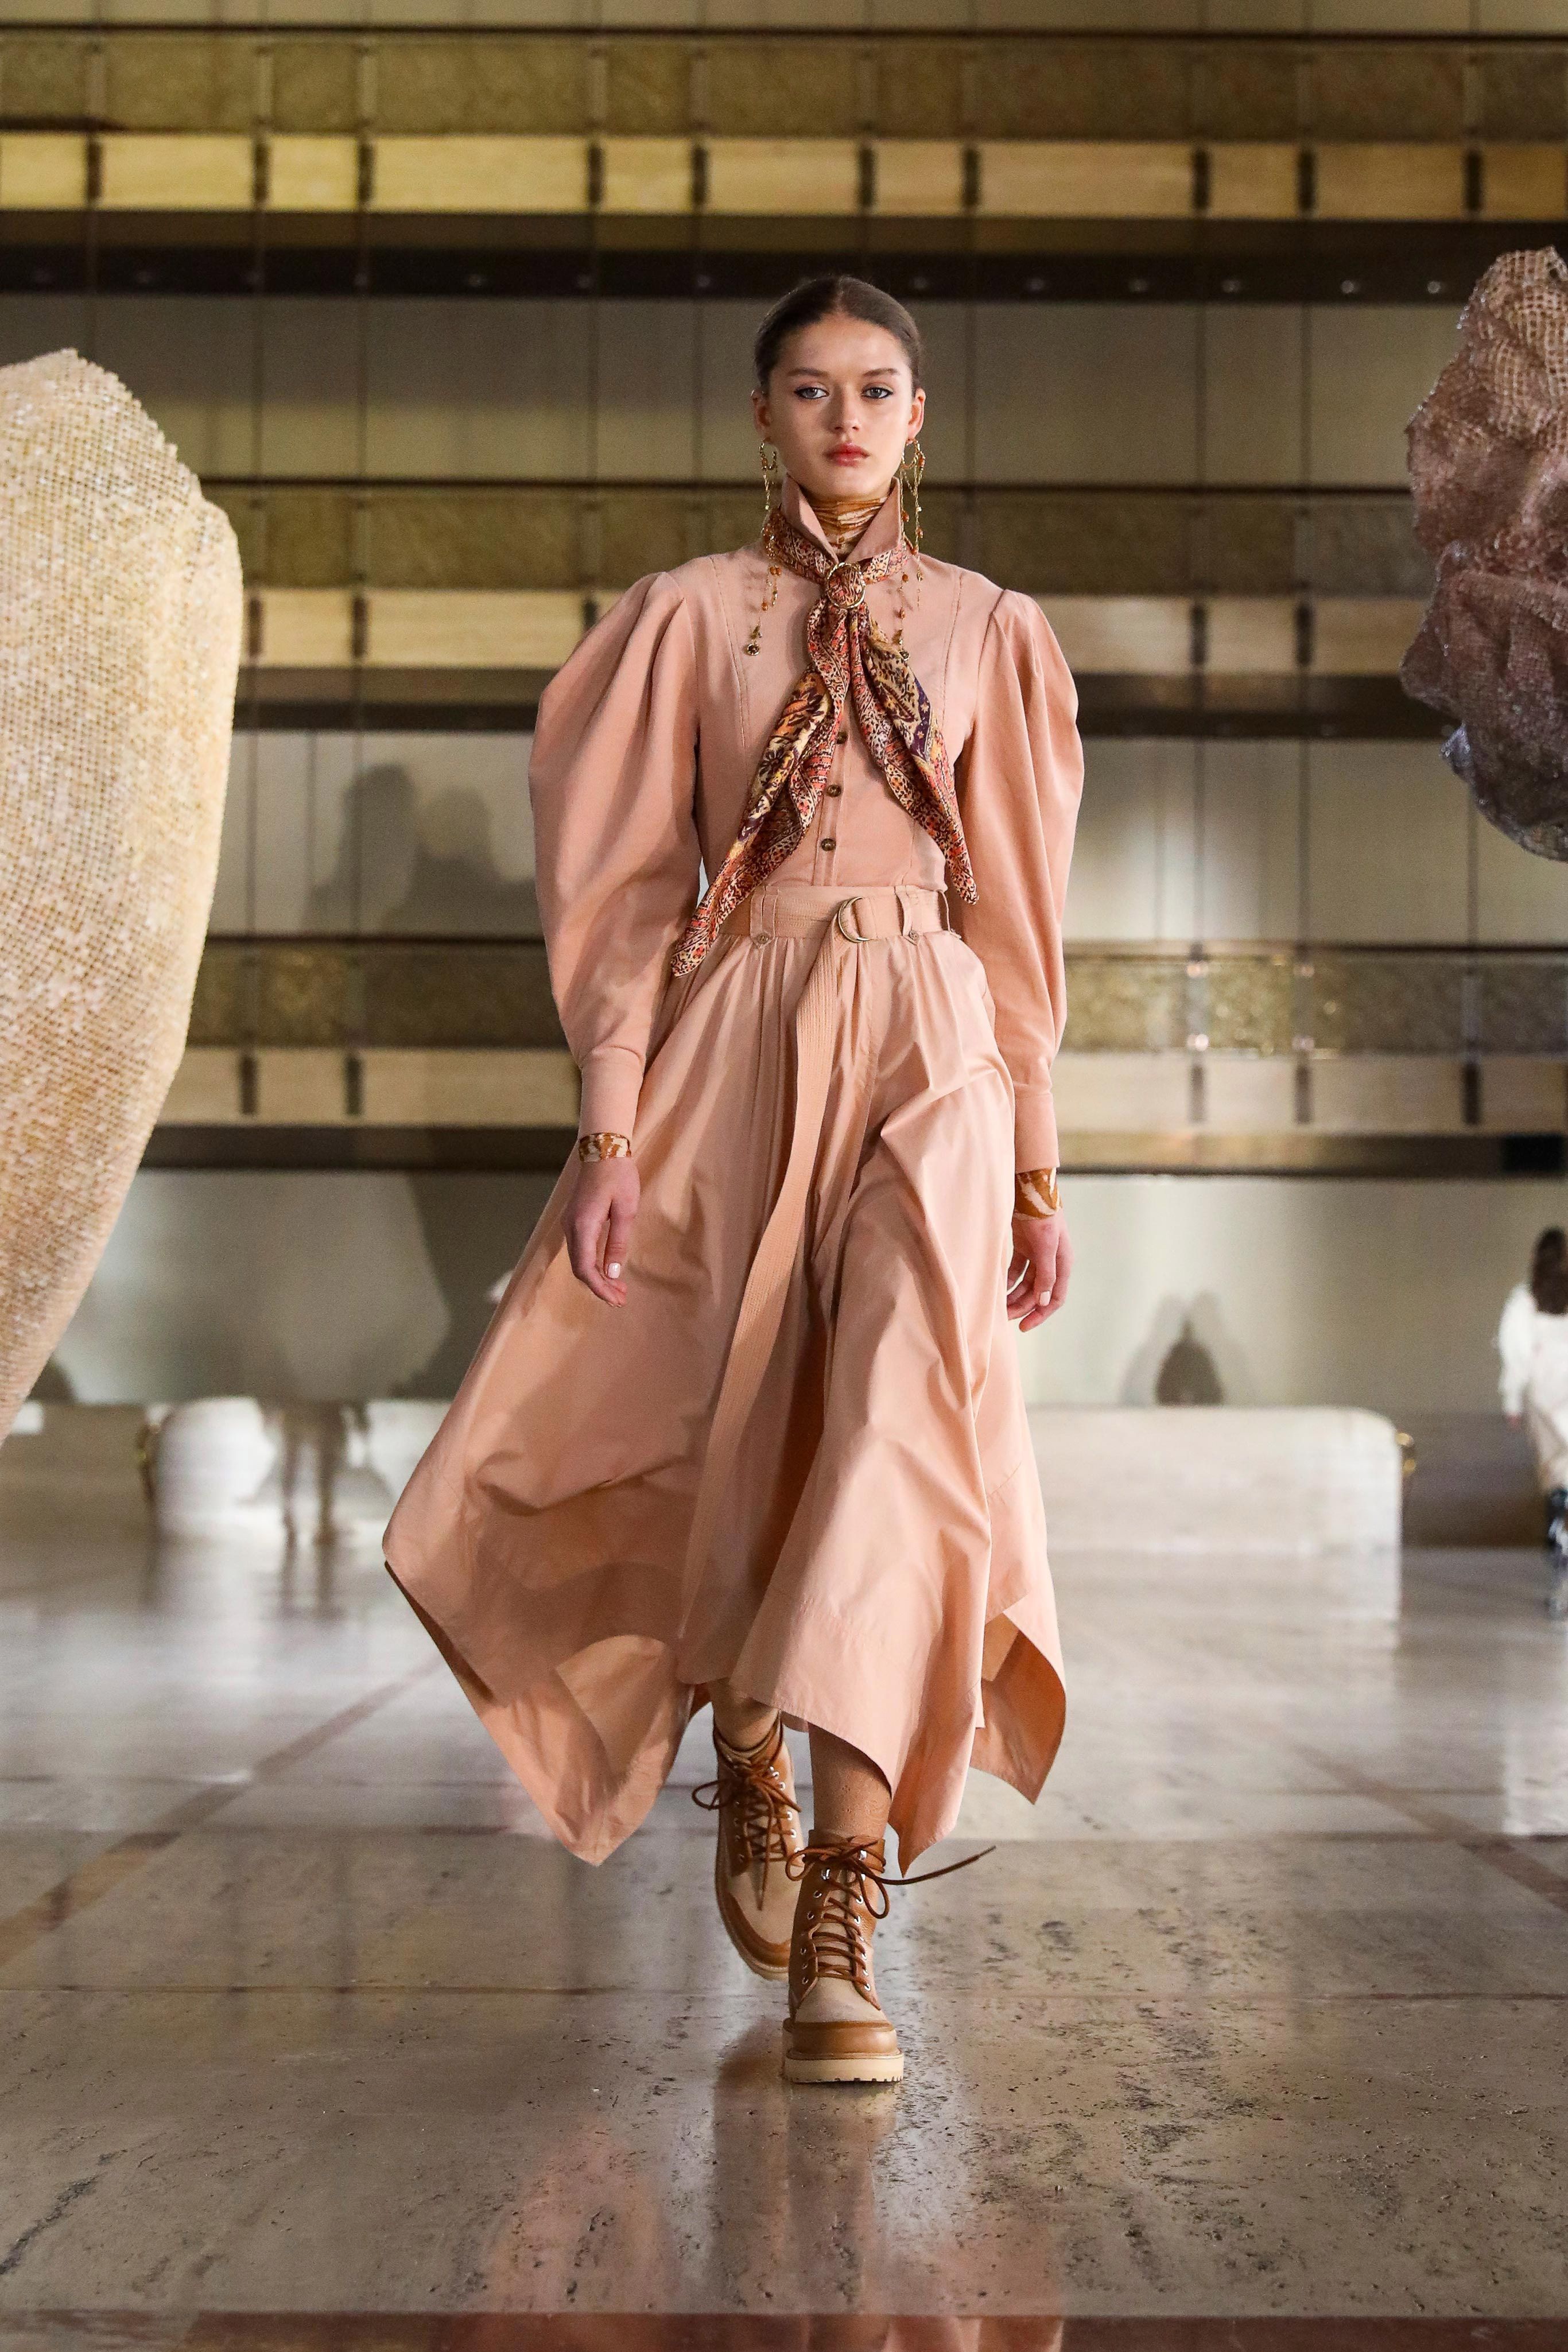 NYFW Fall/Winter 2020: Mashell Goodluck's Intergalatic Looks - Presented by  TheKnockturnal.com! - DivaGalsDaily